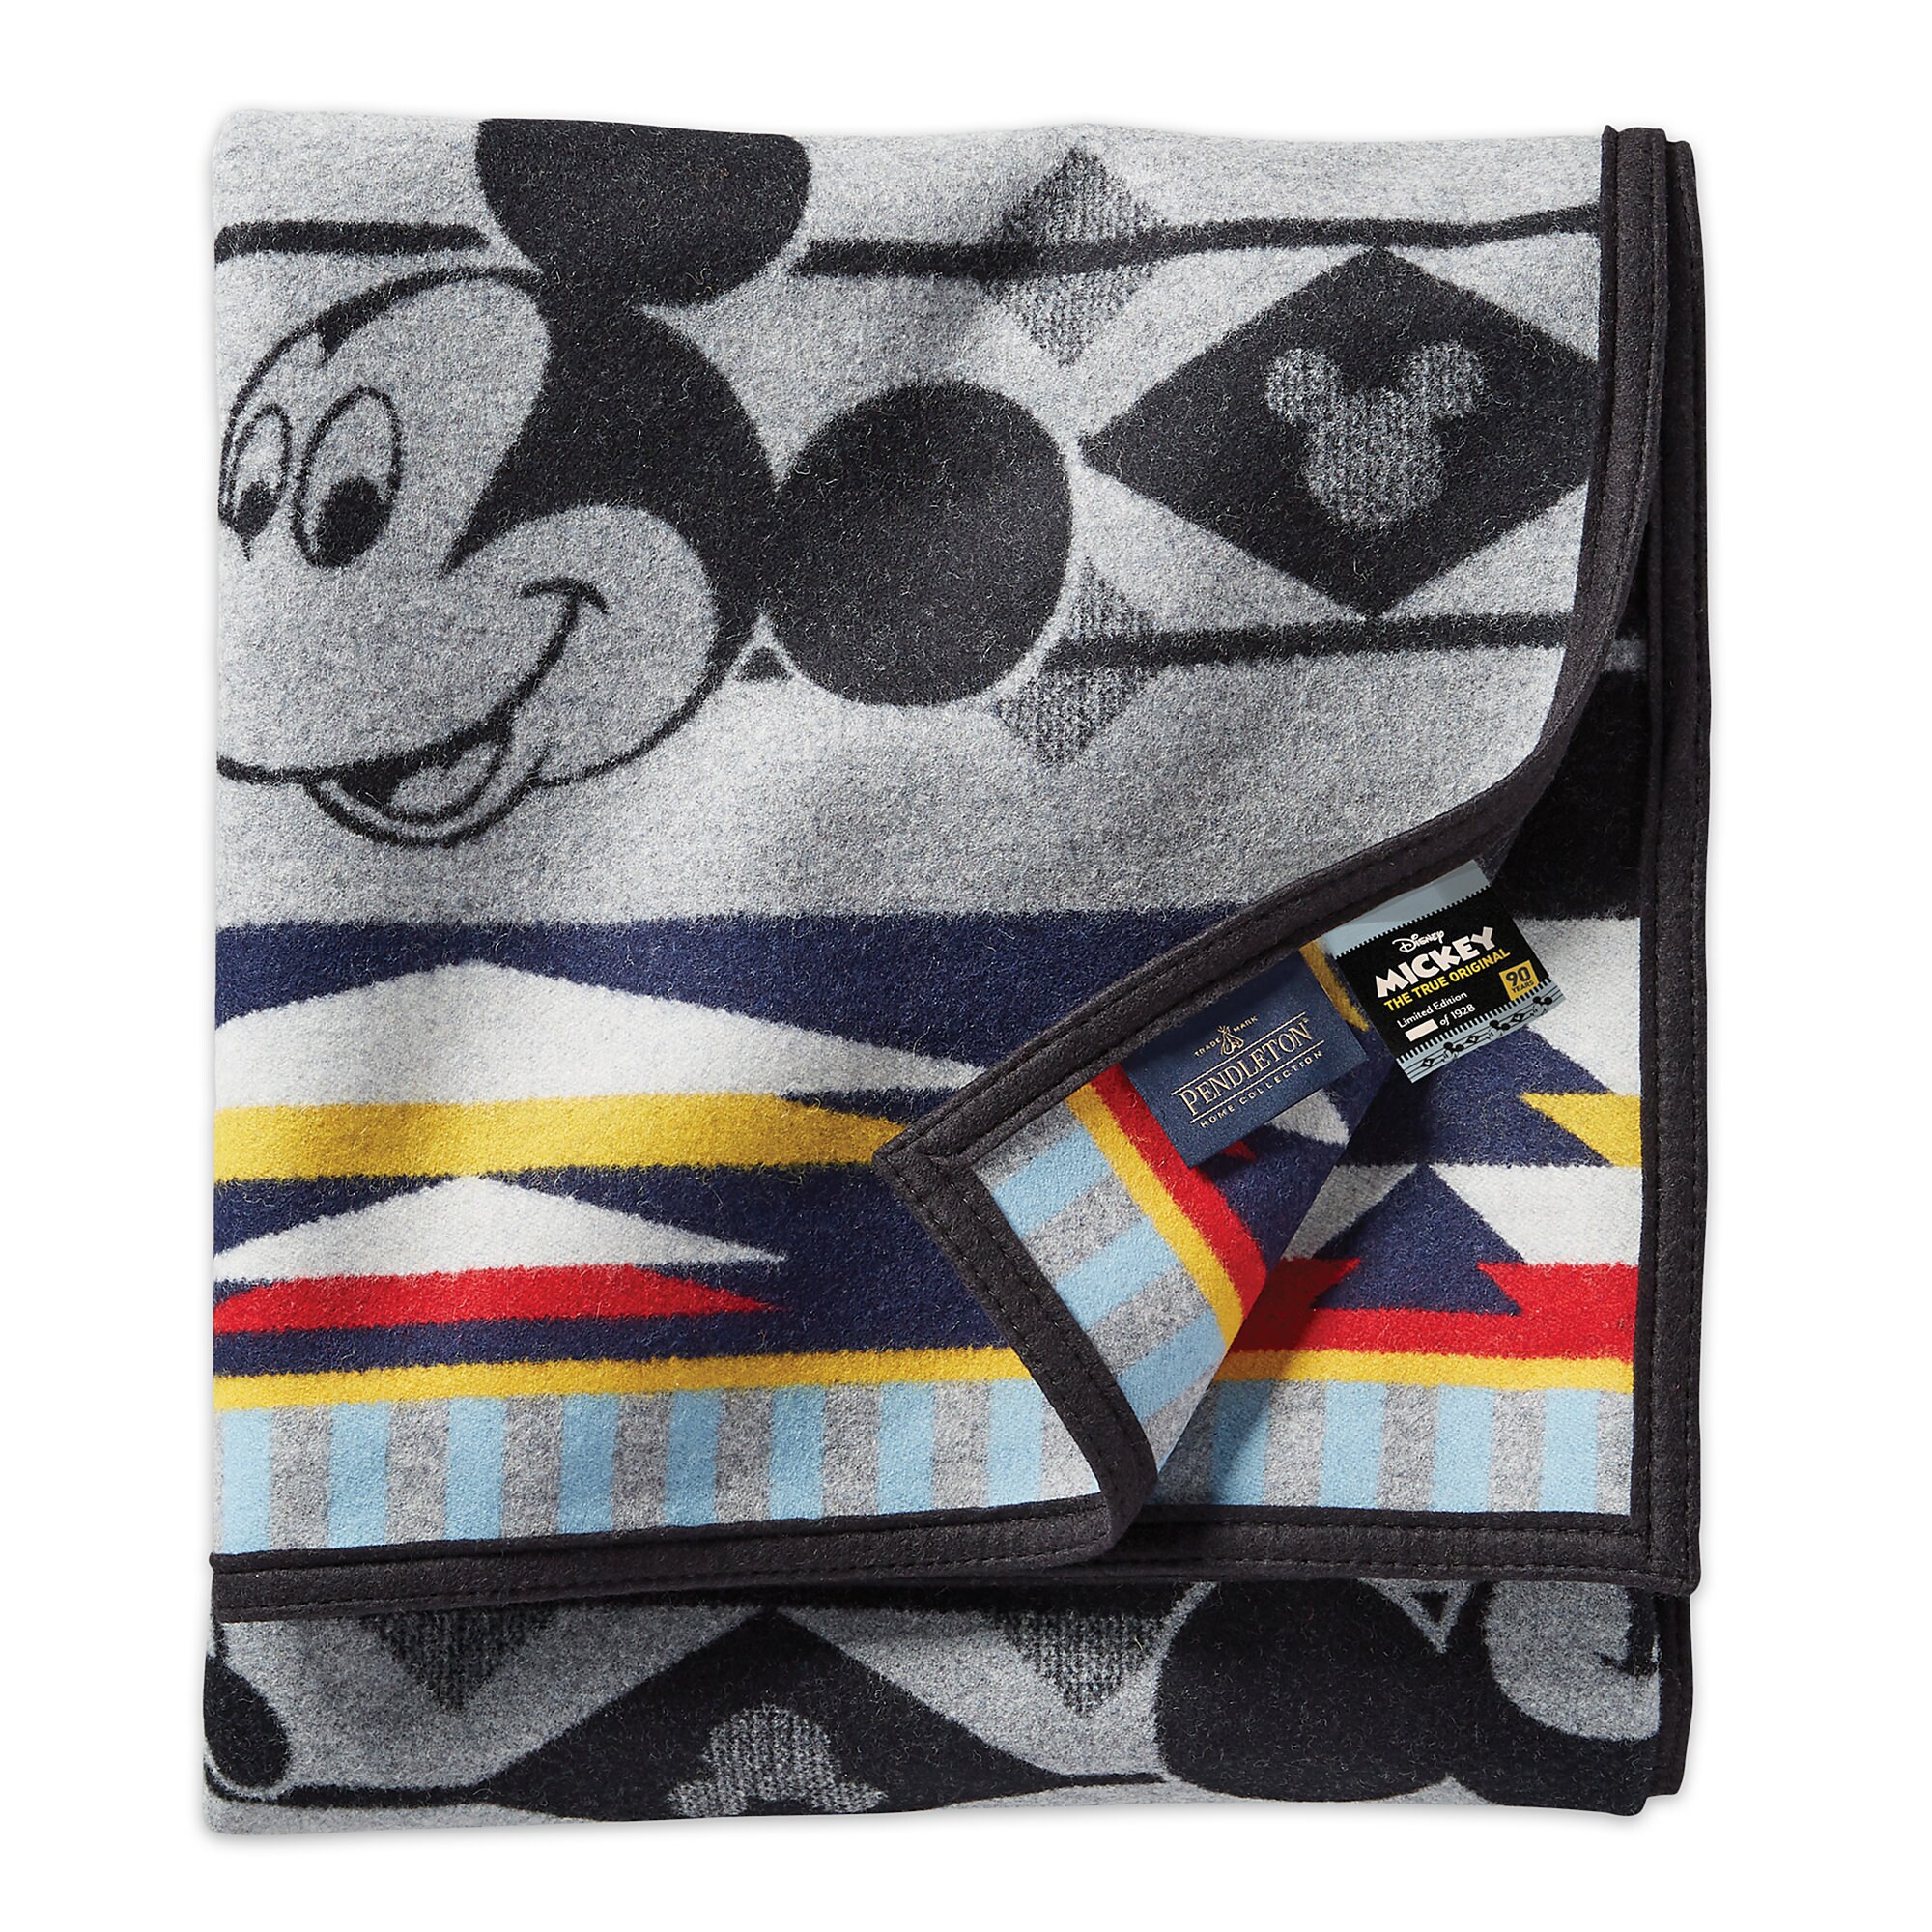 Mickey Mouse ''Mickey Through the Years'' Blanket by Pendleton - Limited Edition